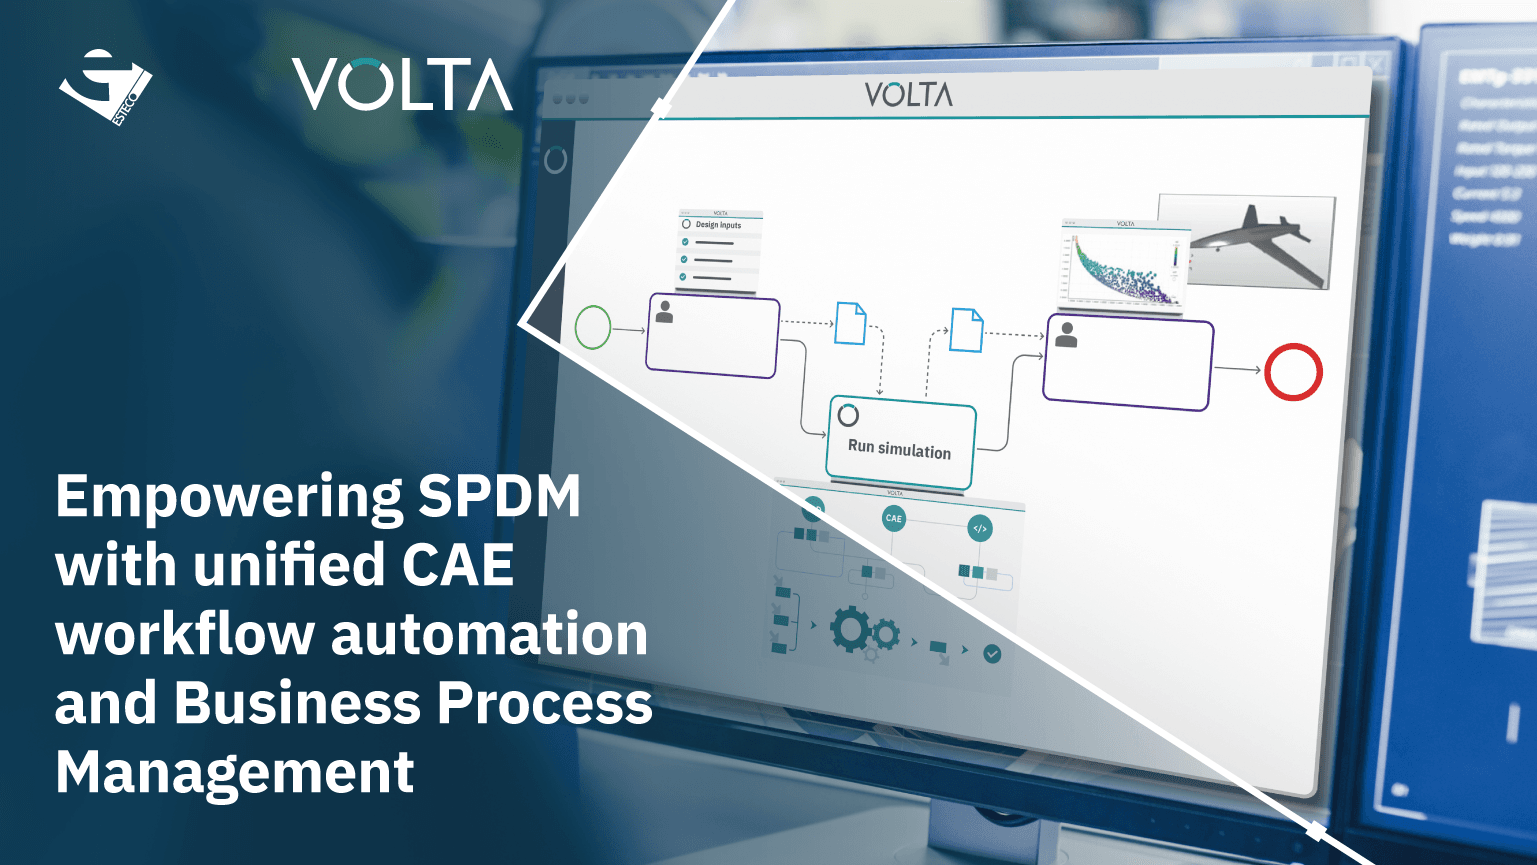 Empowering SPDM with unified CAE workflow automation and Business Process Management